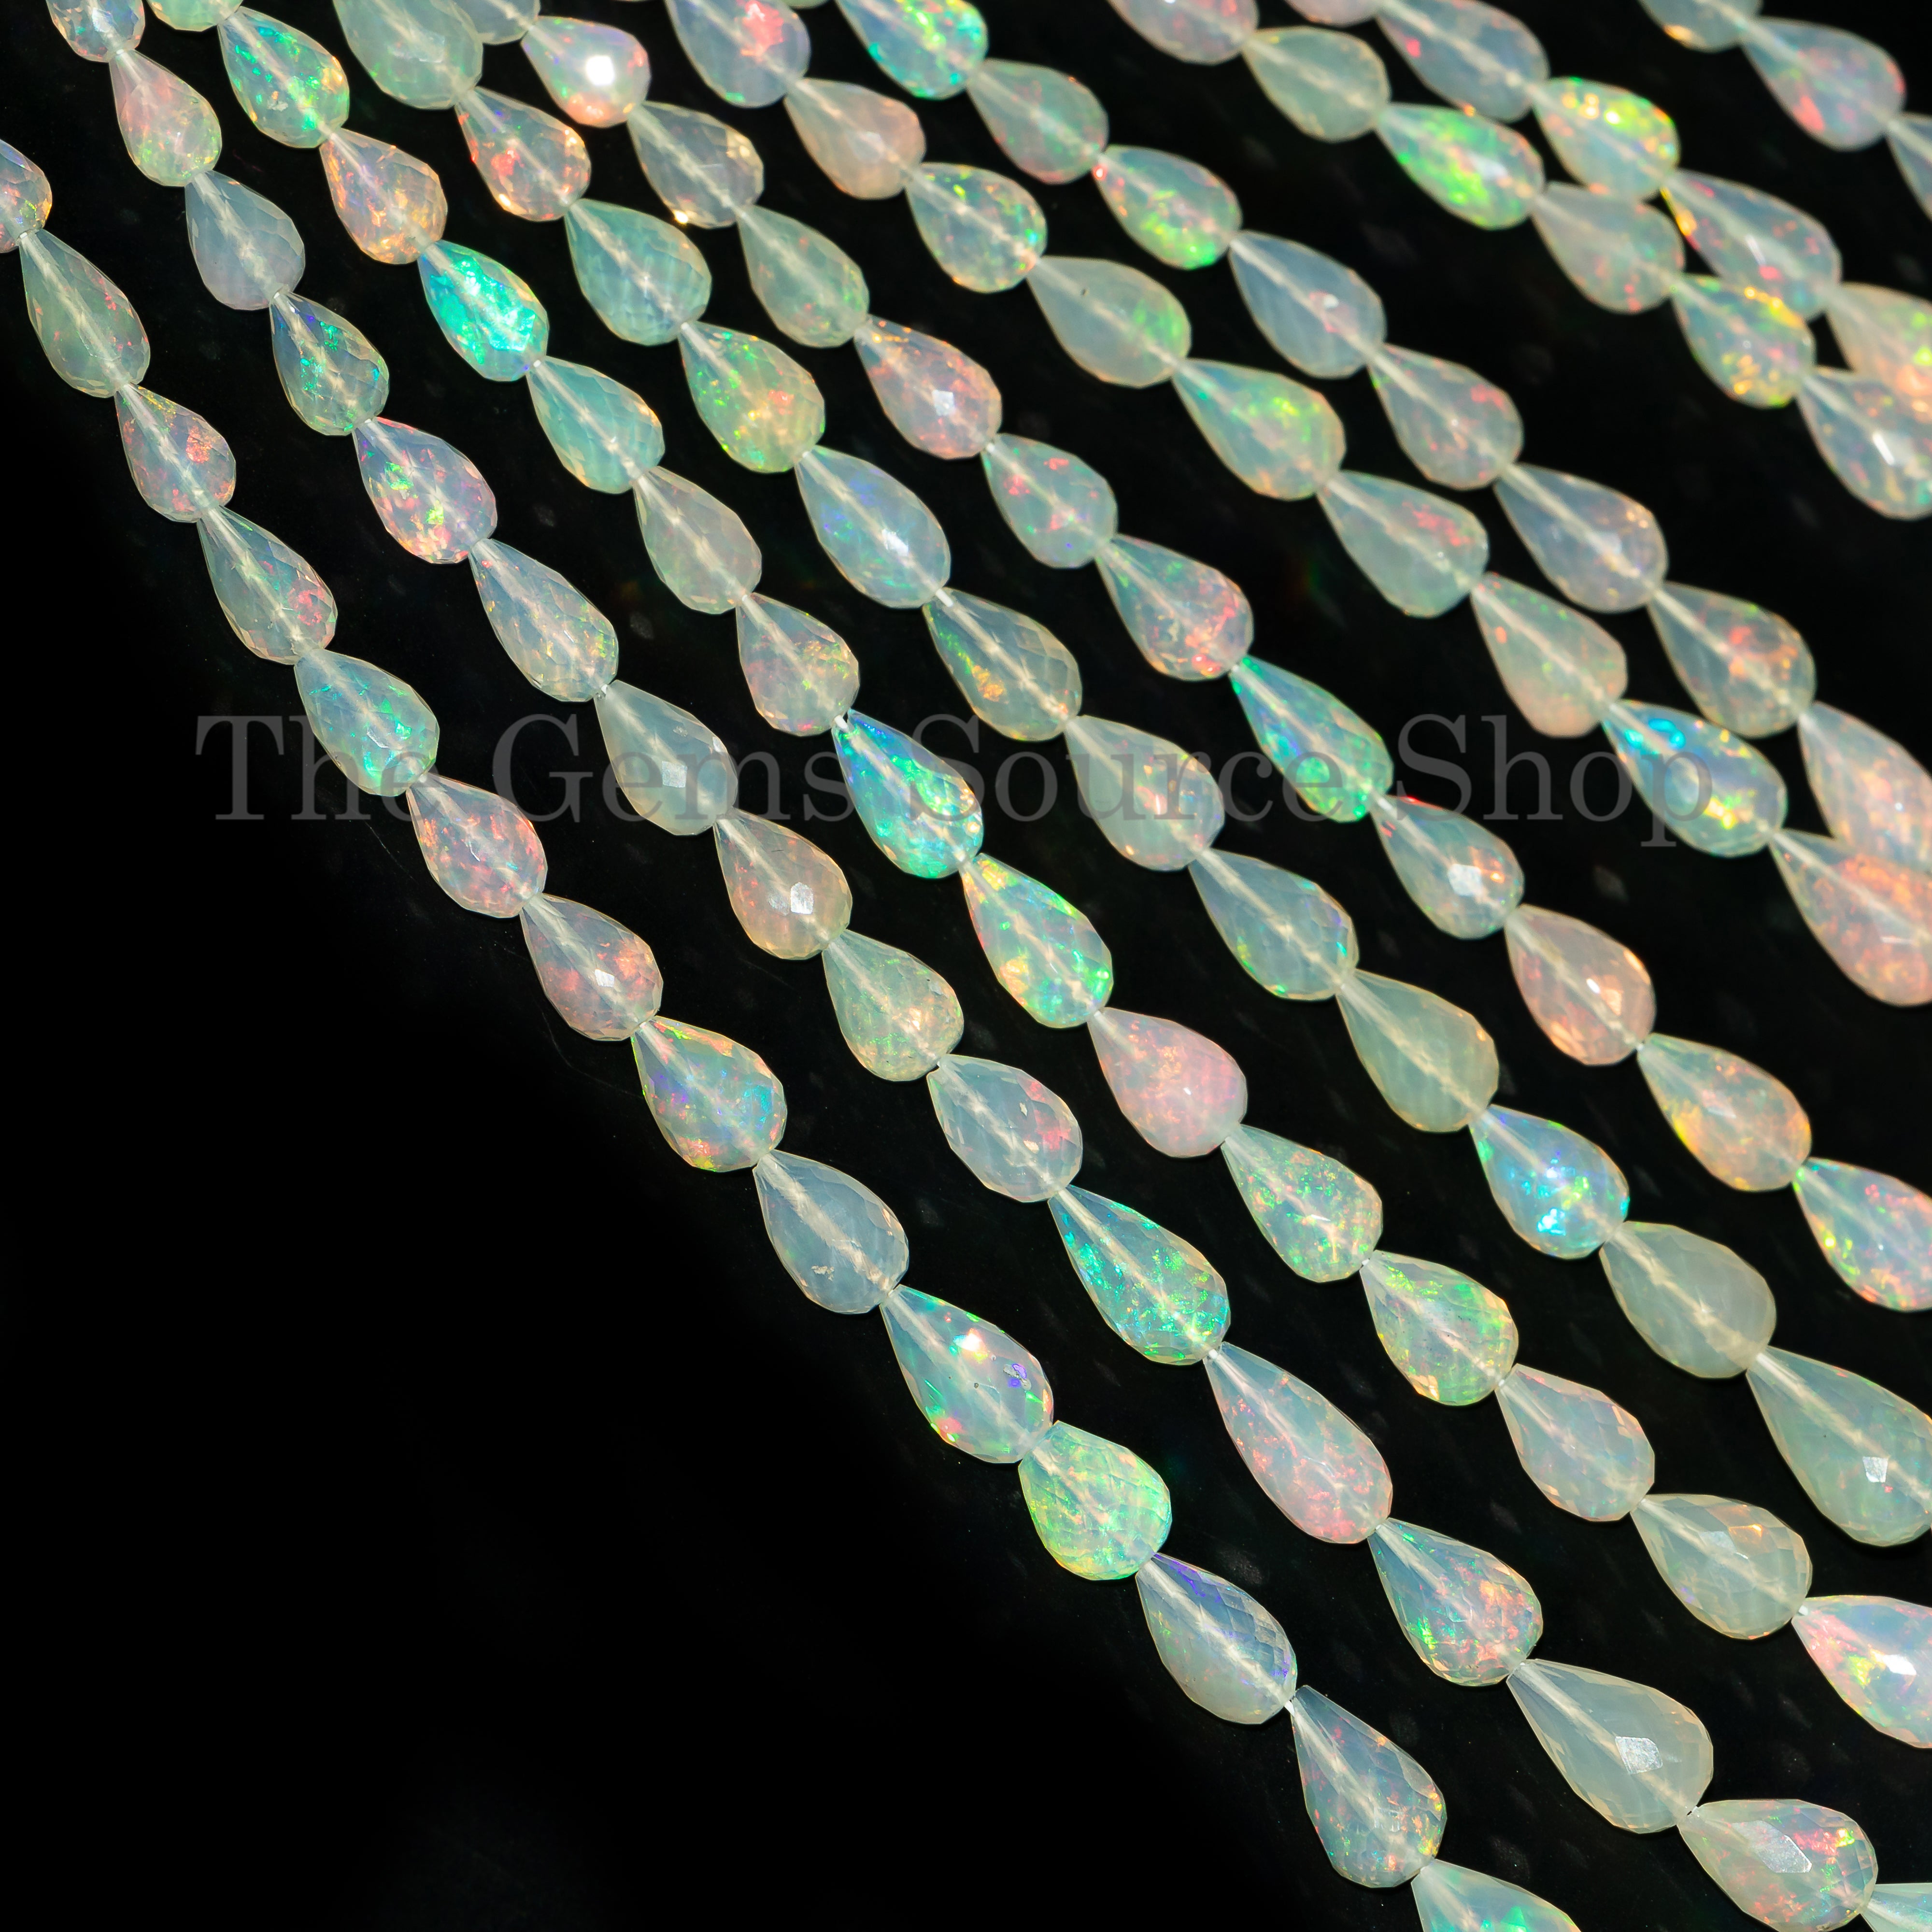 Top Quality Ethiopian Opal Beads, Opal Faceted Drops Shape, Opal Gemstone Beads